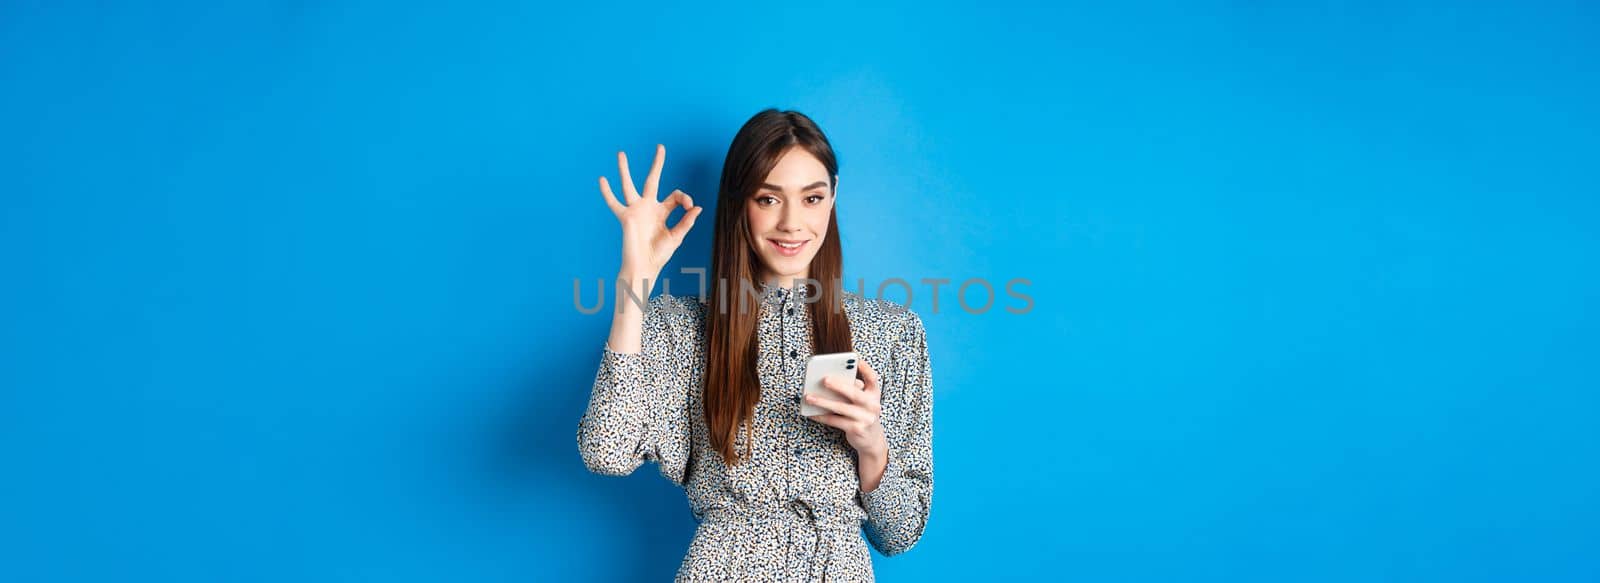 Beautiful young woman in dress showing okay sign and using smartphone, smiling at camera, standing on blue background.